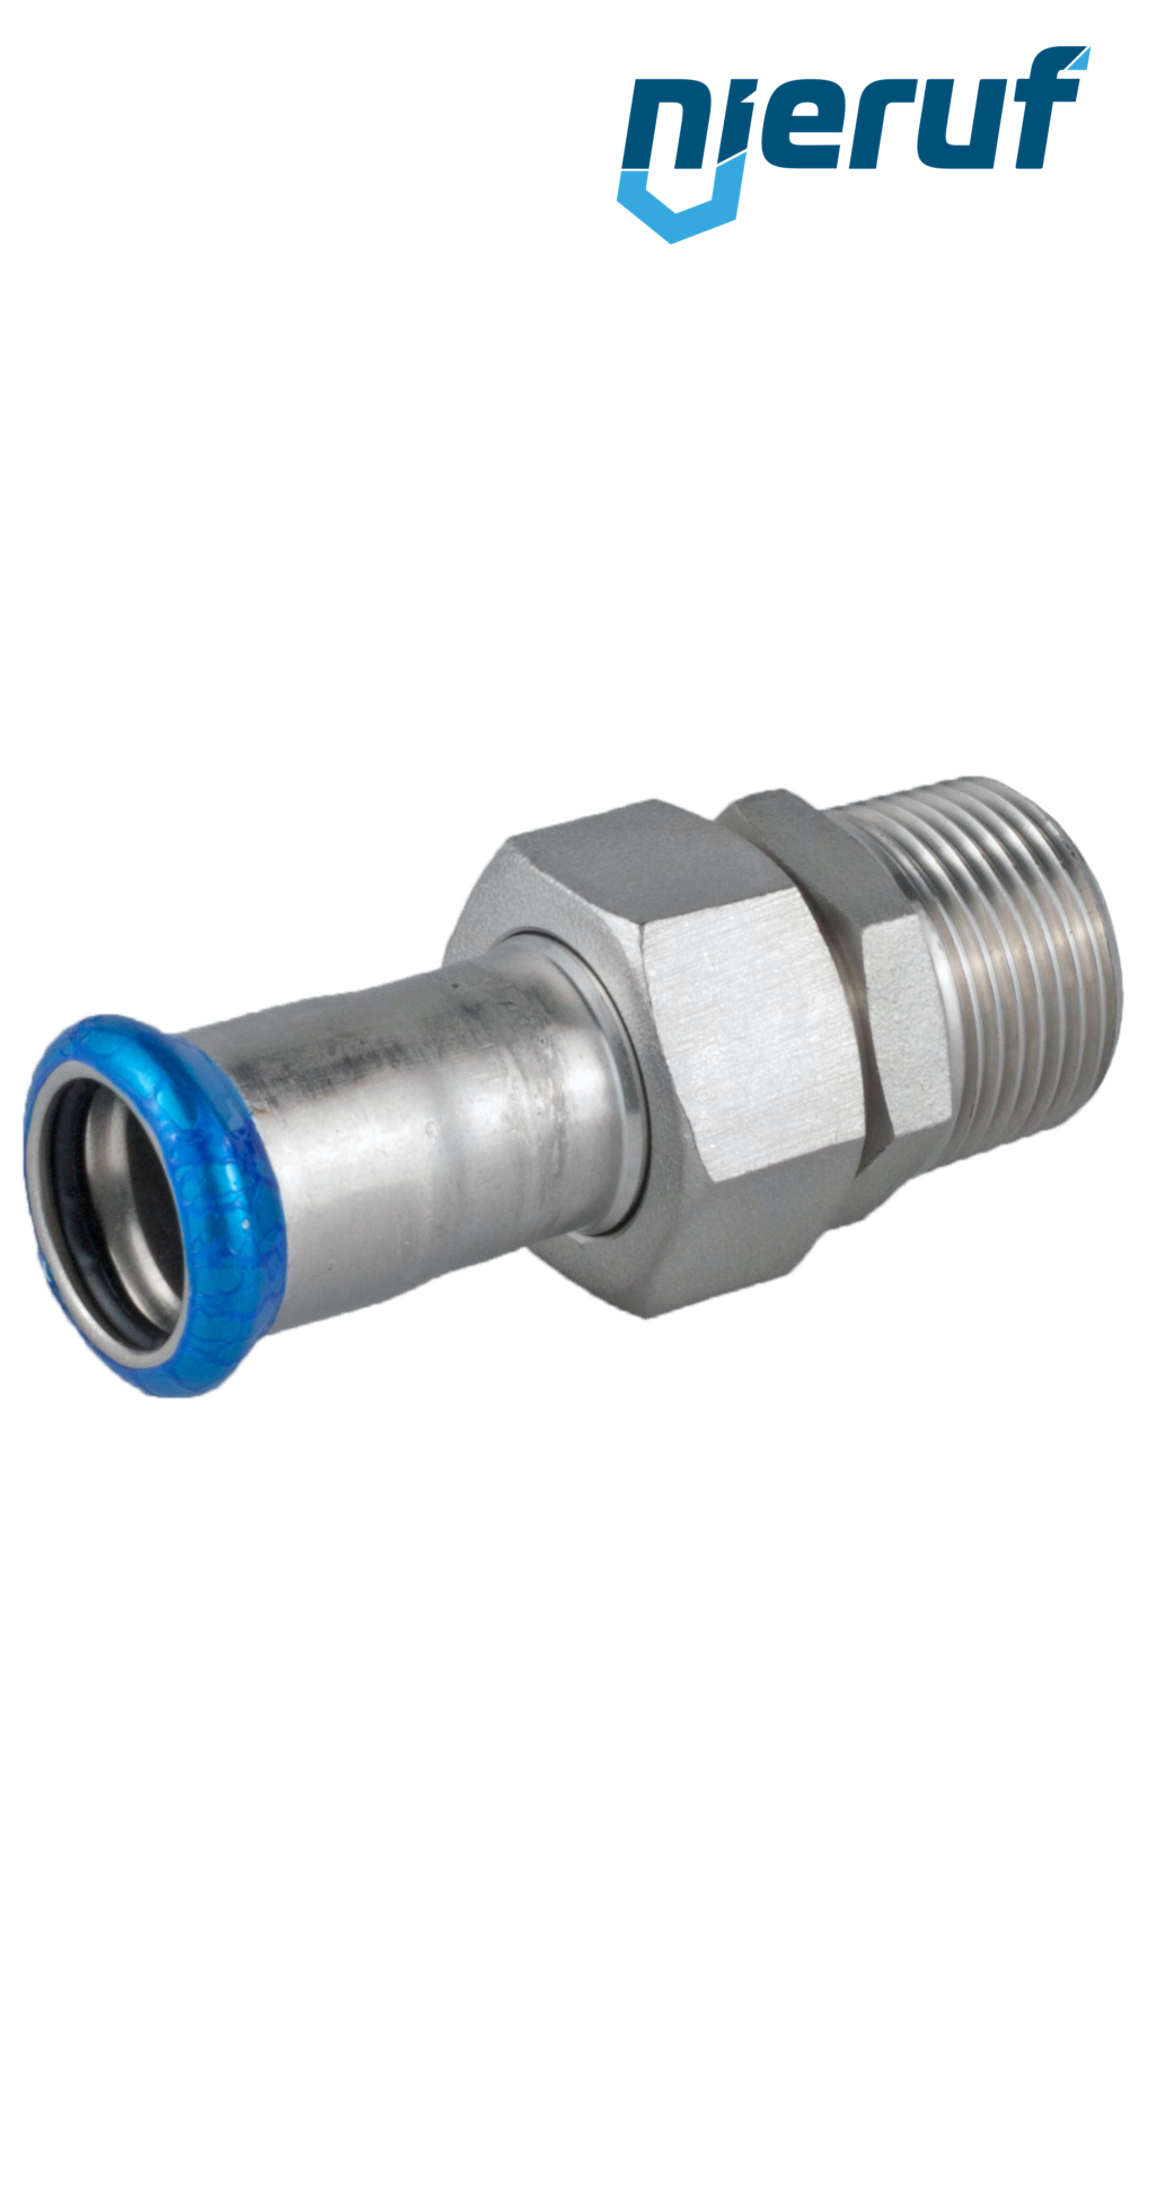 Union Coupling Pressfitting F DN12 - 15,0 mm male thread 1/2" inch stainless steel